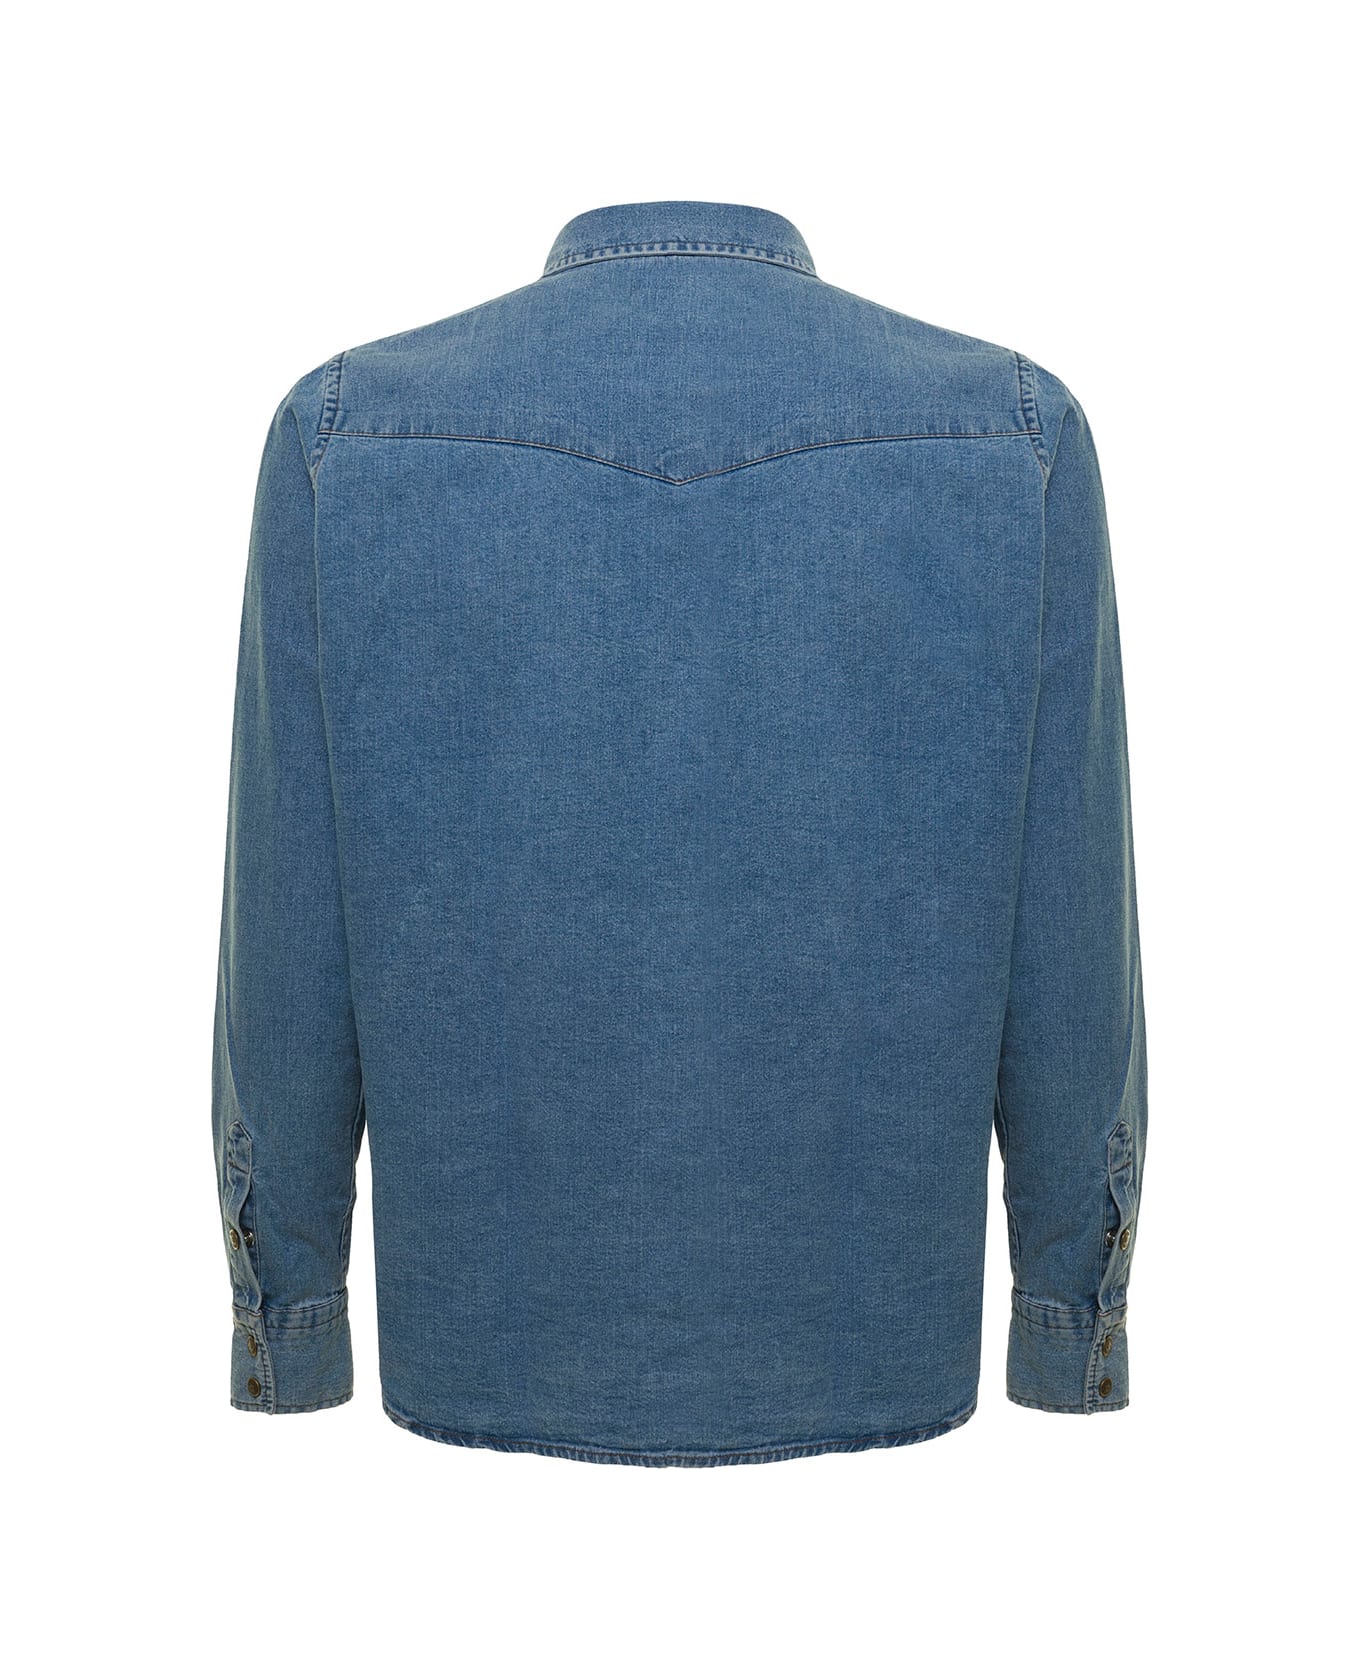 Tom Ford Blue Denim Shirt With Patch Pockets In Cotton Man - Blu